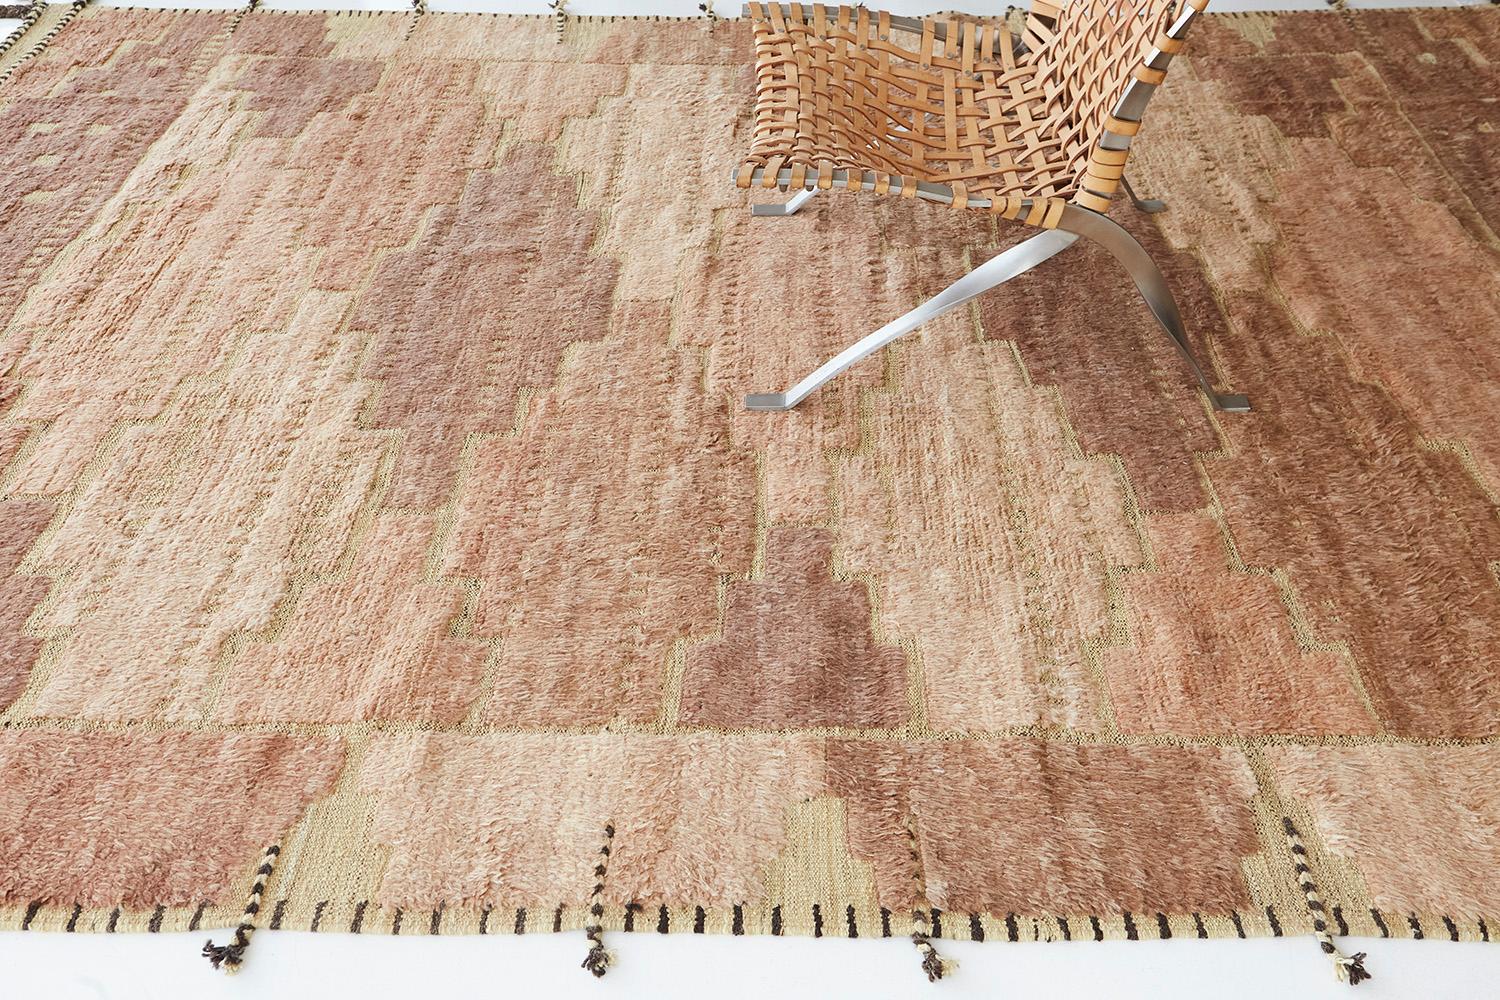 The Ulriken rug is a handwoven wool piece inspired by vintage Scandinavian design elements and recreated for the modern design world. The repetitive slant grid creates balance and harmony, handwoven with a neutral flat weave and unique piles of